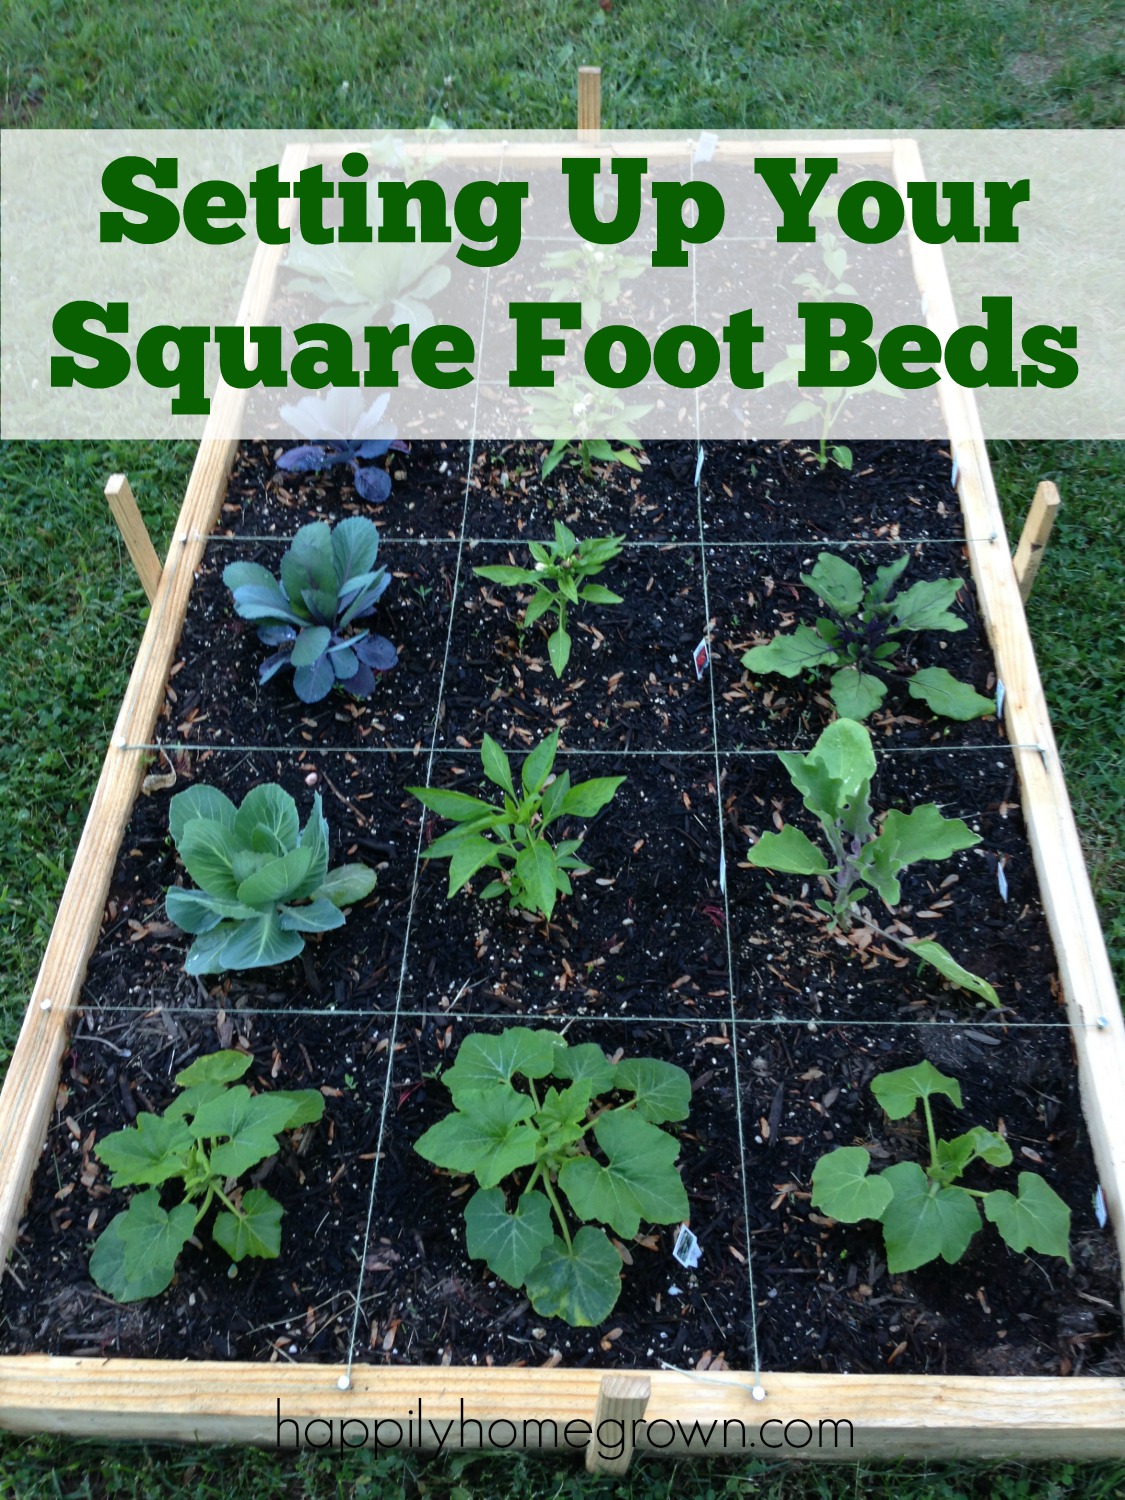 Setting Up Your Square Foot Beds - The whole idea behind Square Foot Gardening (SFG) is to grow more in less space. This saves you time, money, and resources while producing an abundance of produce!